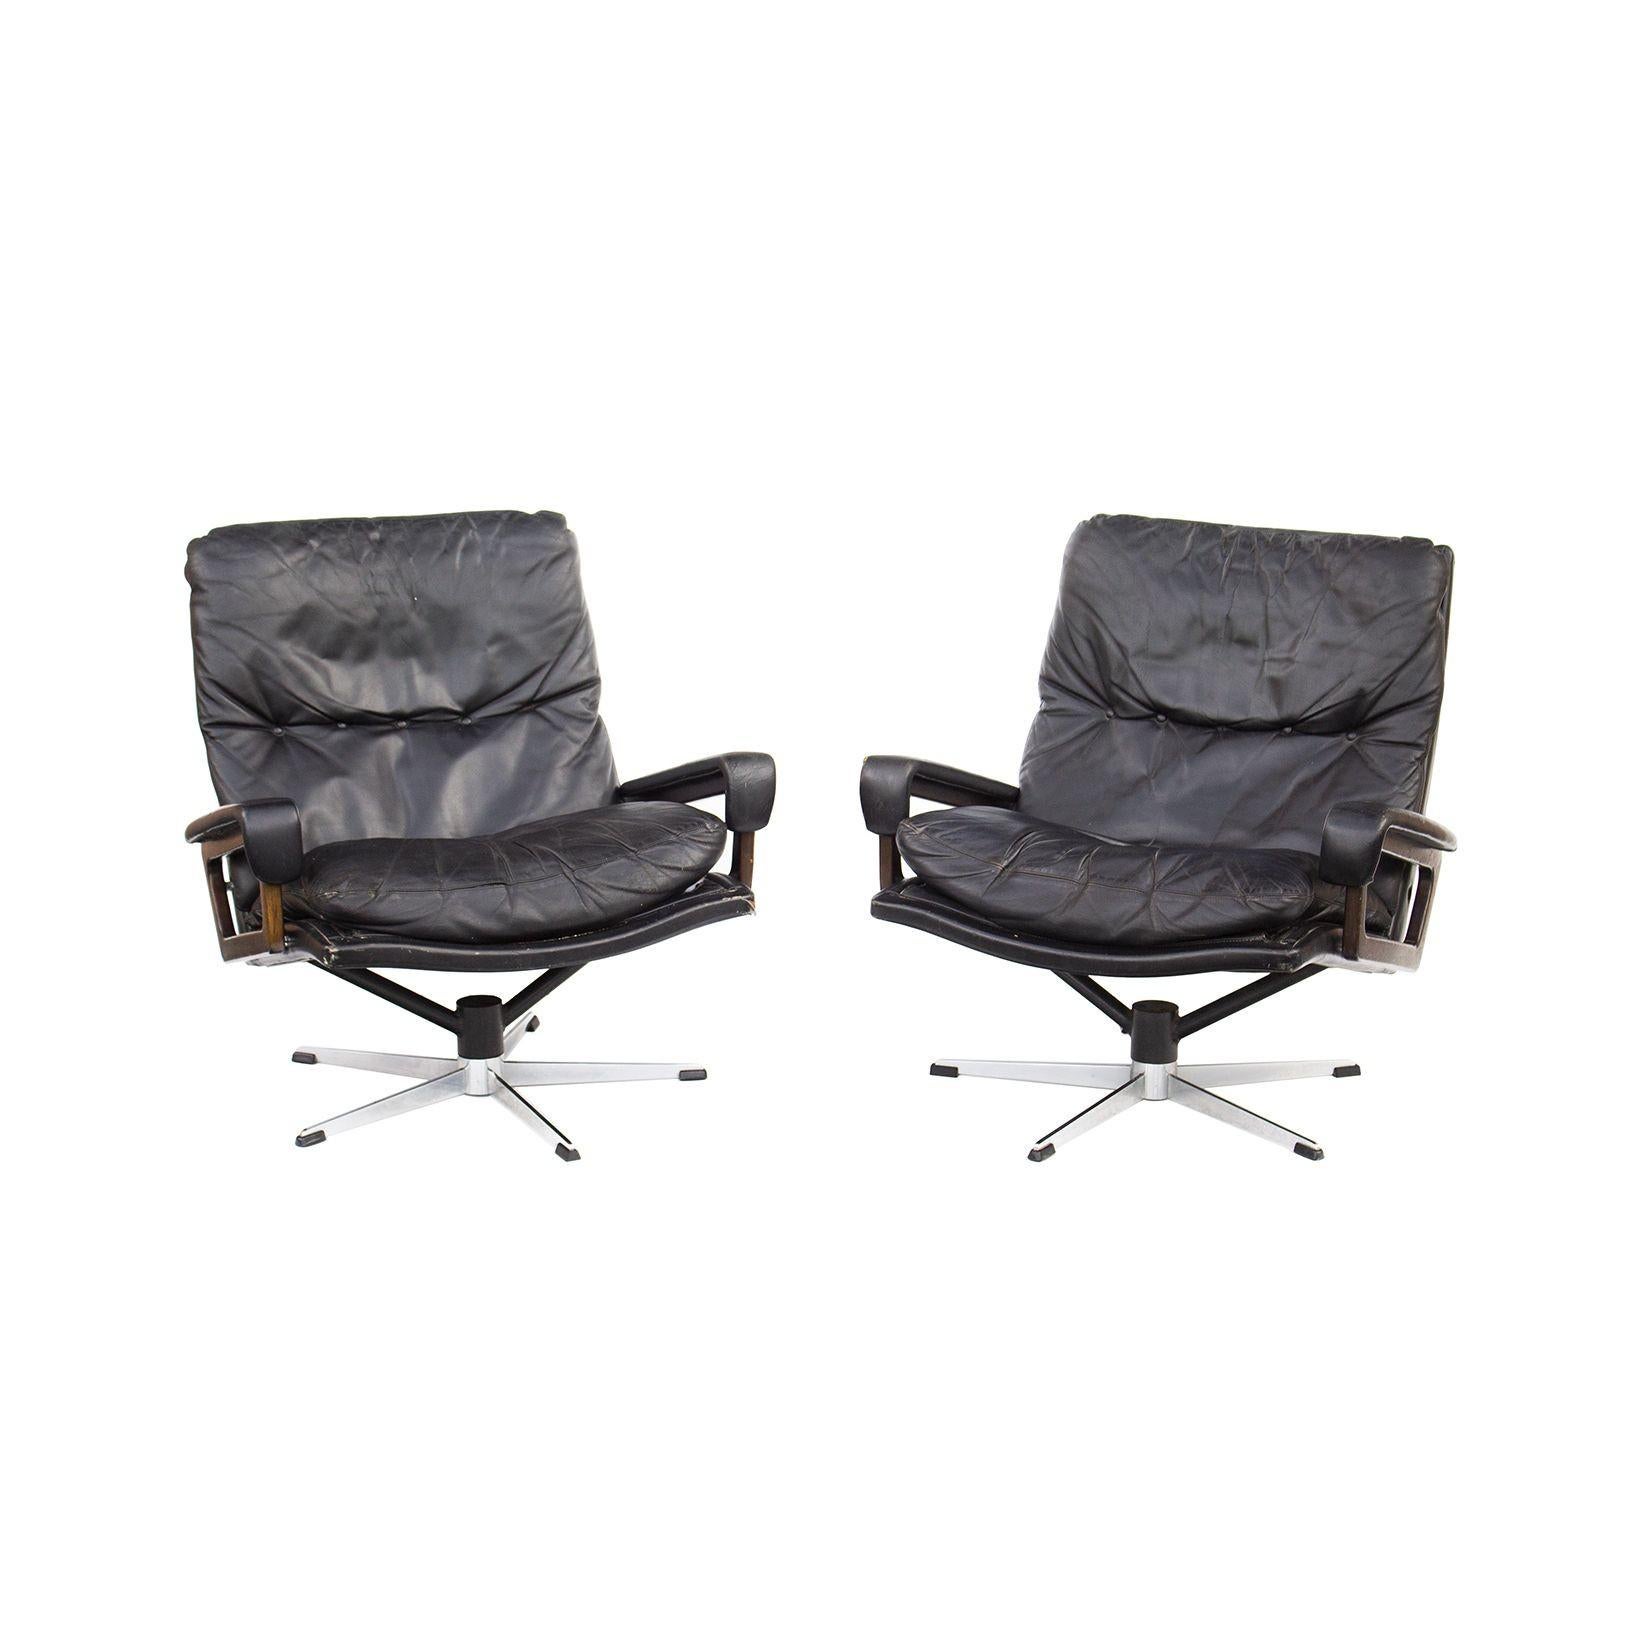 Switzerland, 1960s
Pair of leather 'King Chair' swivel armchairs by Andre Vandenbeuck for Strässle Switzerland. They are upholstered in black leather and have sculpted arms in either rosewood or walnut. The bases are a five point design and swivel.